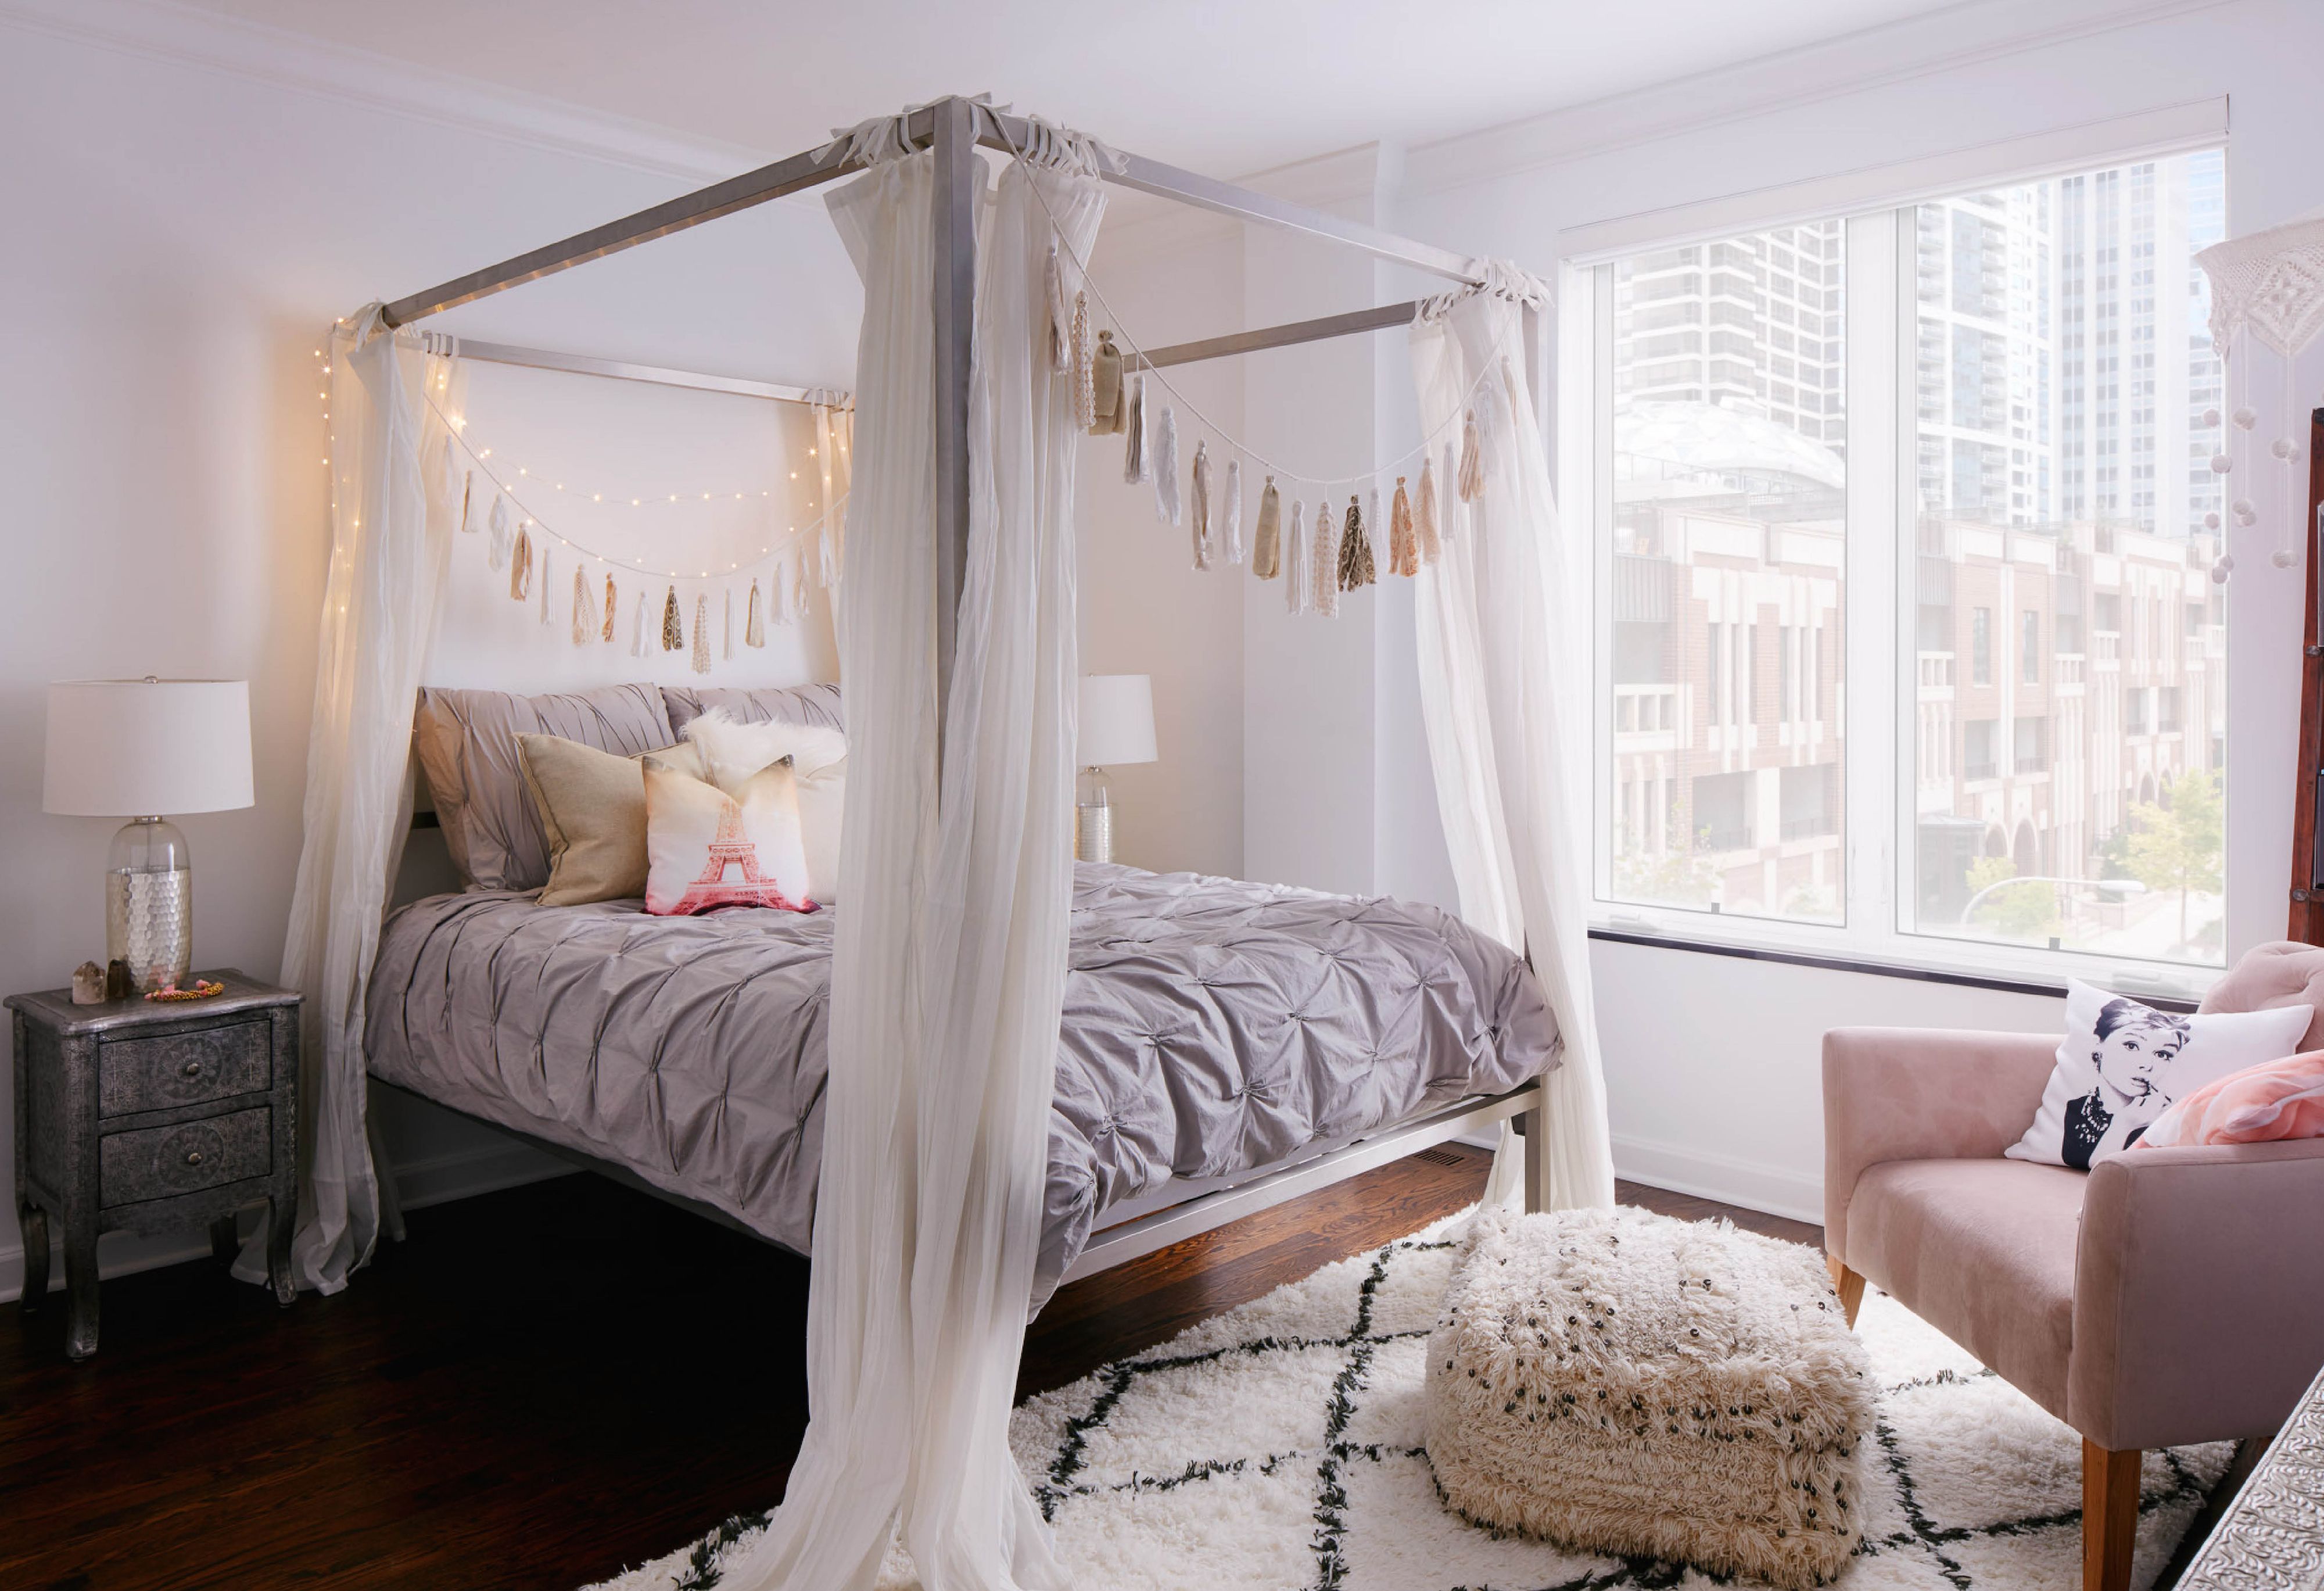 40 Best Canopy Bed Ideas Four Poster Beds, What Is A Four Poster Bed Canopy Called